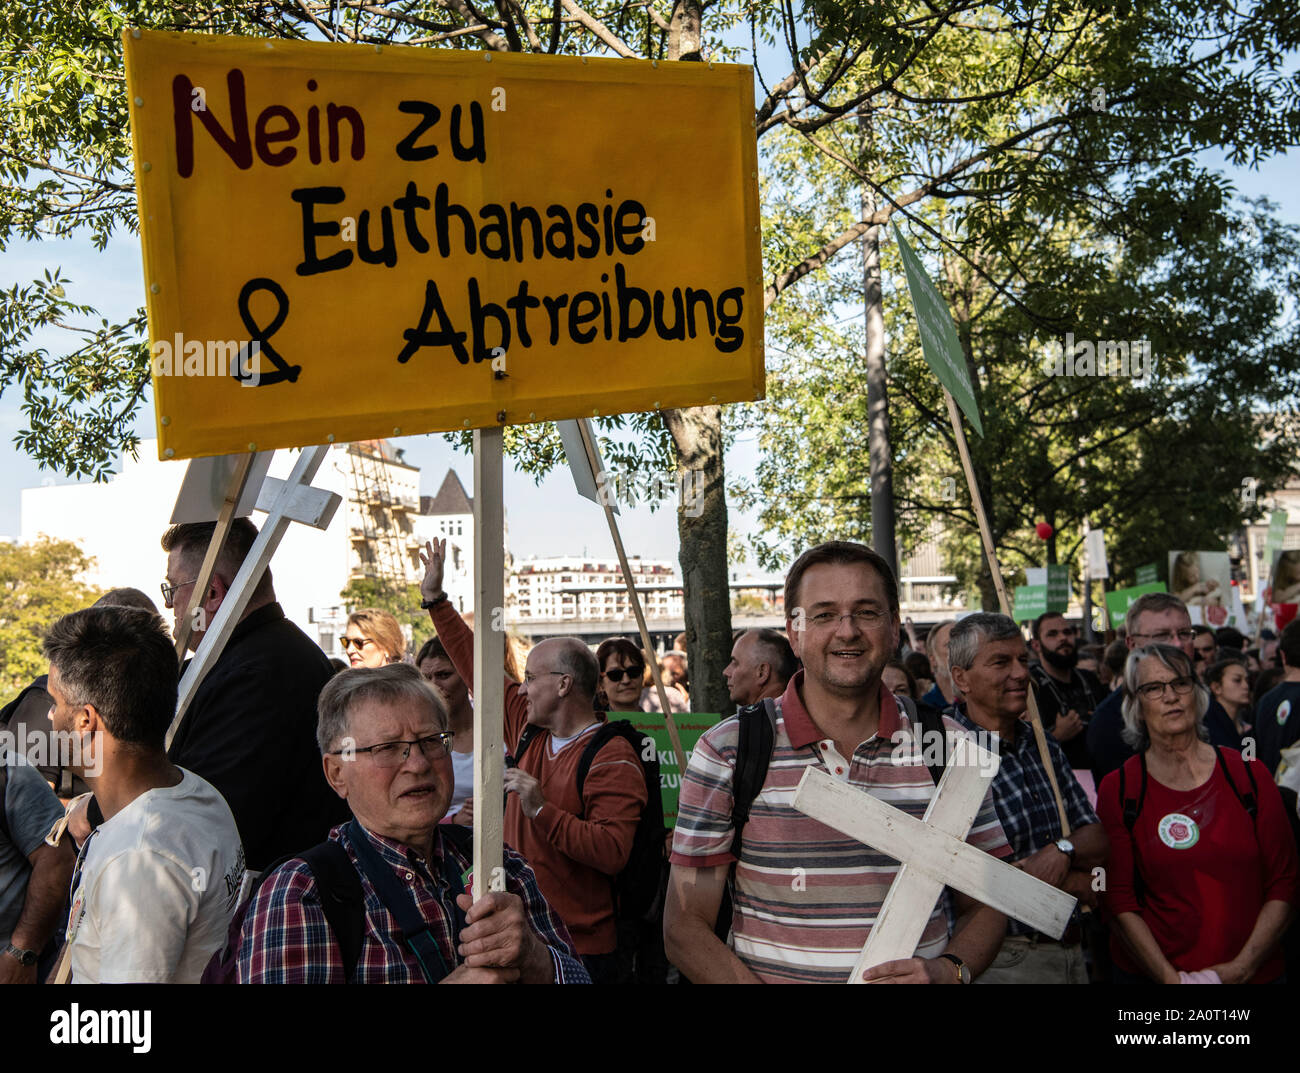 Berlin, Germany. 21st Sep, 2019. A participant of the so-called 'march for life' holds a sign with the inscription 'No to euthanasia and abortion' in the government district. According to the organizer, the association Bundesverband Lebensrecht, the Catholic Church, as well as doctors' and lawyers' associations participated in the 'March for Life'. Hundreds of people demonstrated in Berlin-Mitte against a demonstration by anti-abortion activists. Credit: Paul Zinken/dpa/Alamy Live News Stock Photo